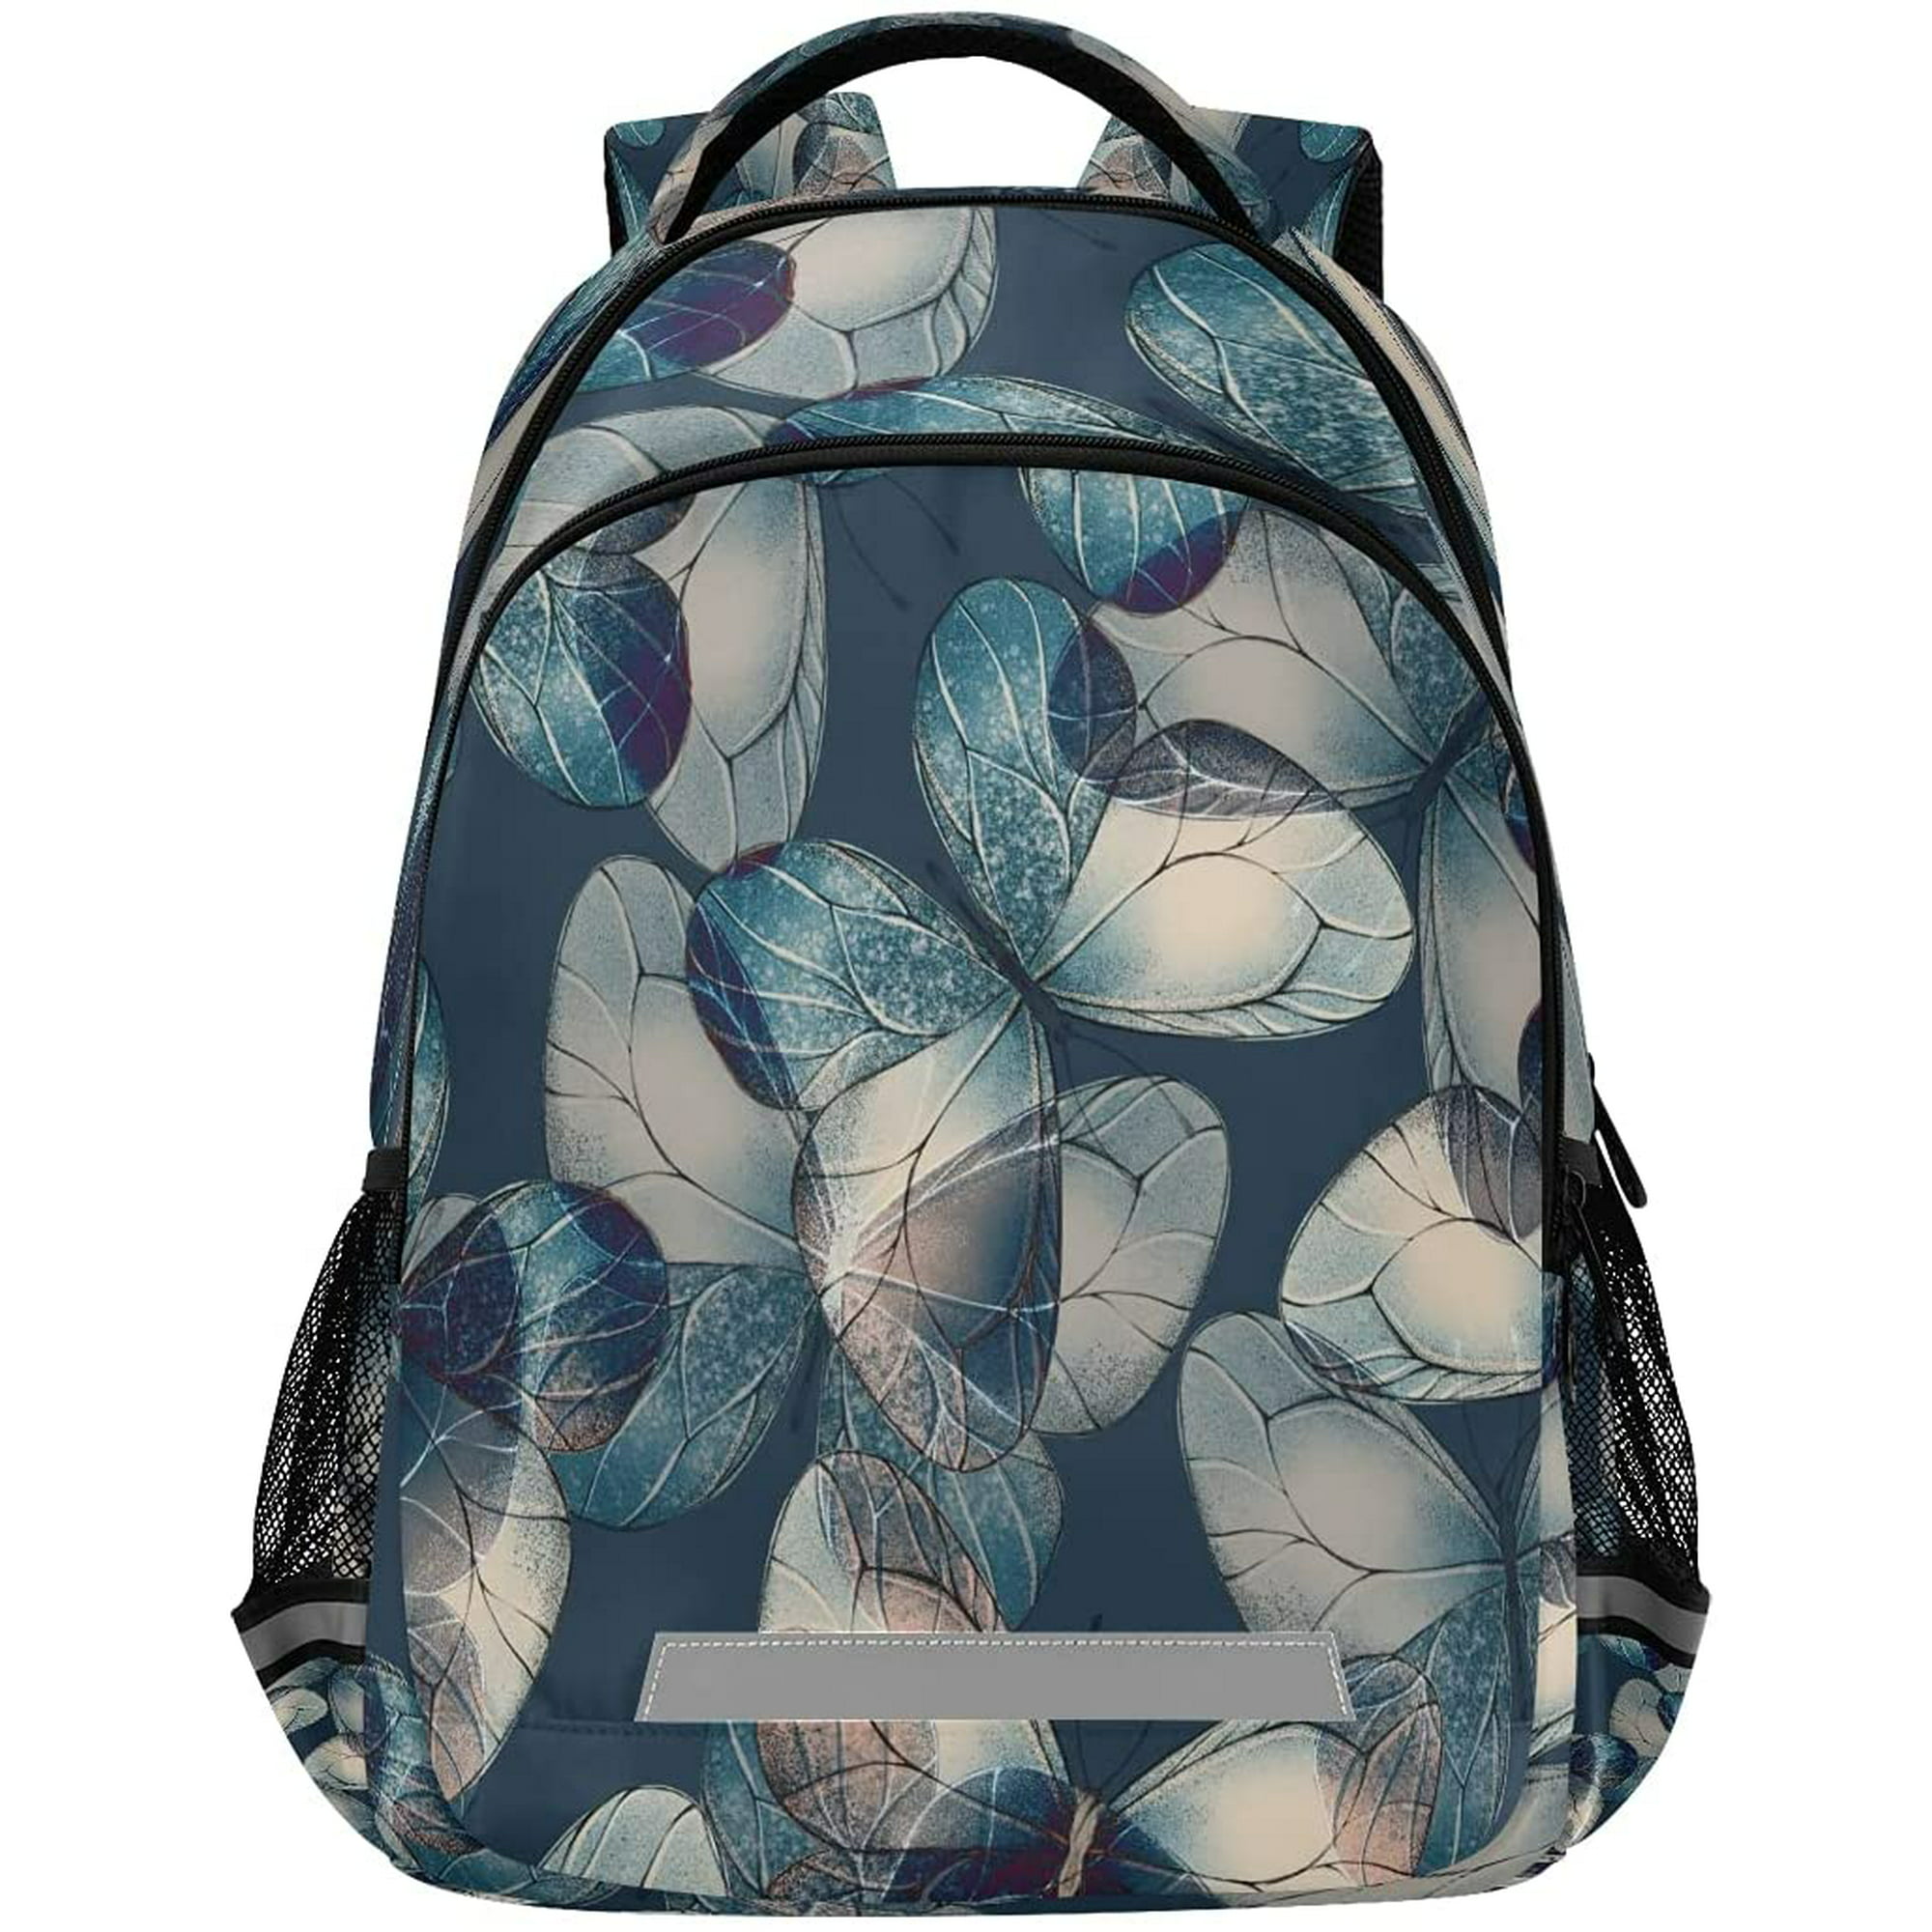 Colorful Butterfly Backpacks Travel Laptop Daypack School Bags for Teens Men Women 